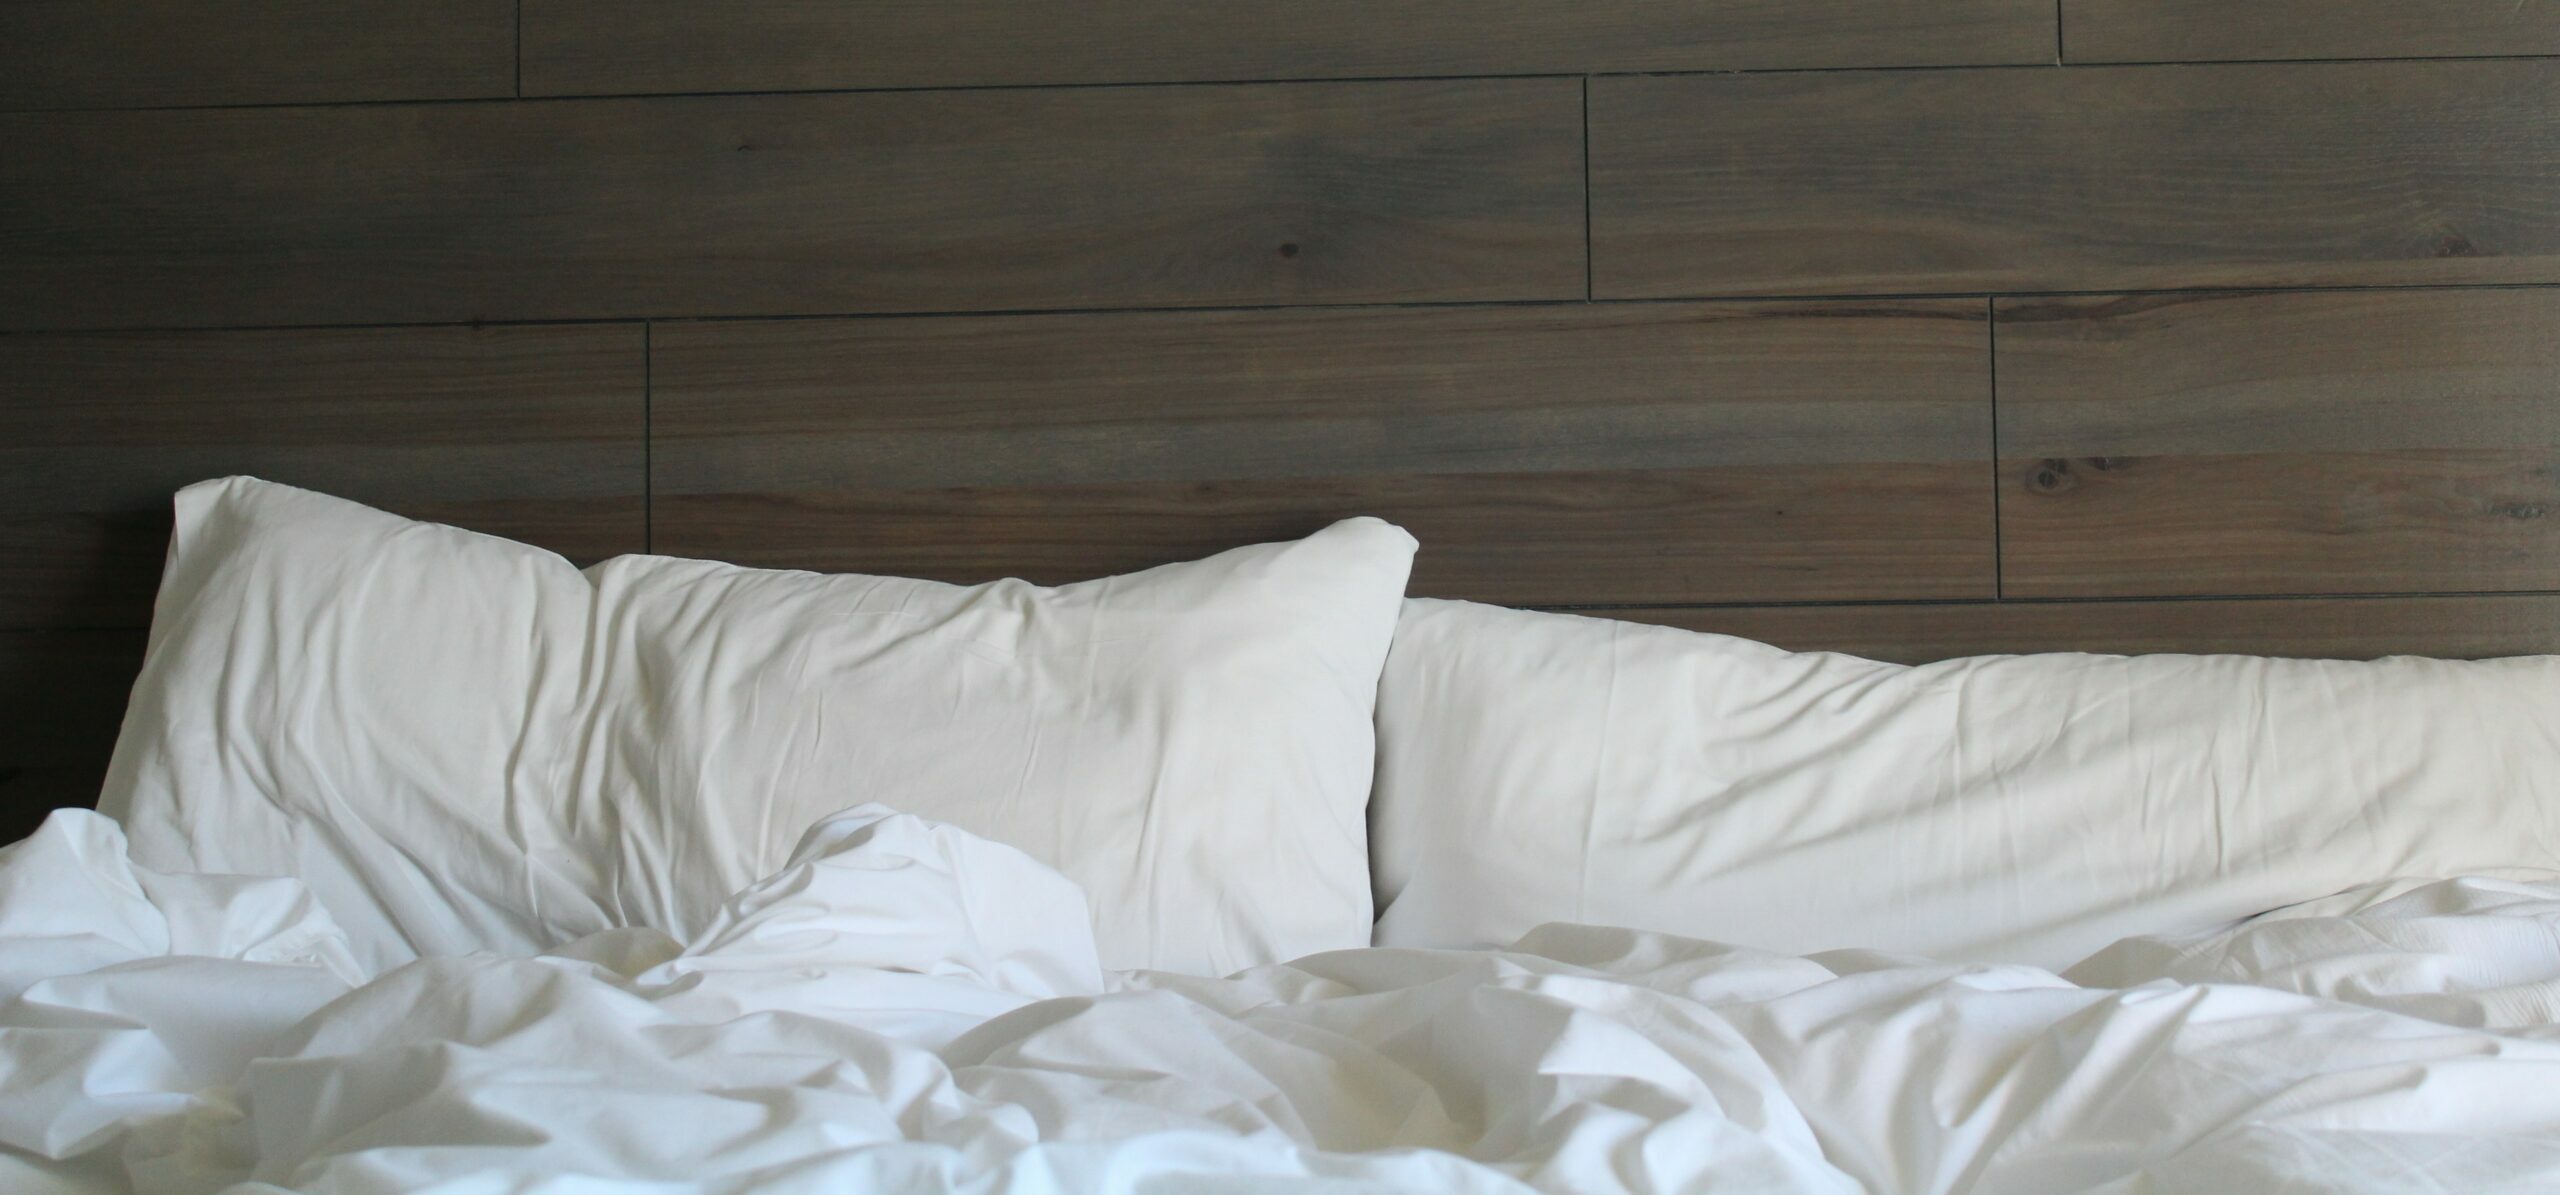 6 Signs of Bed Bug Infestation You Shouldn’t Ignore